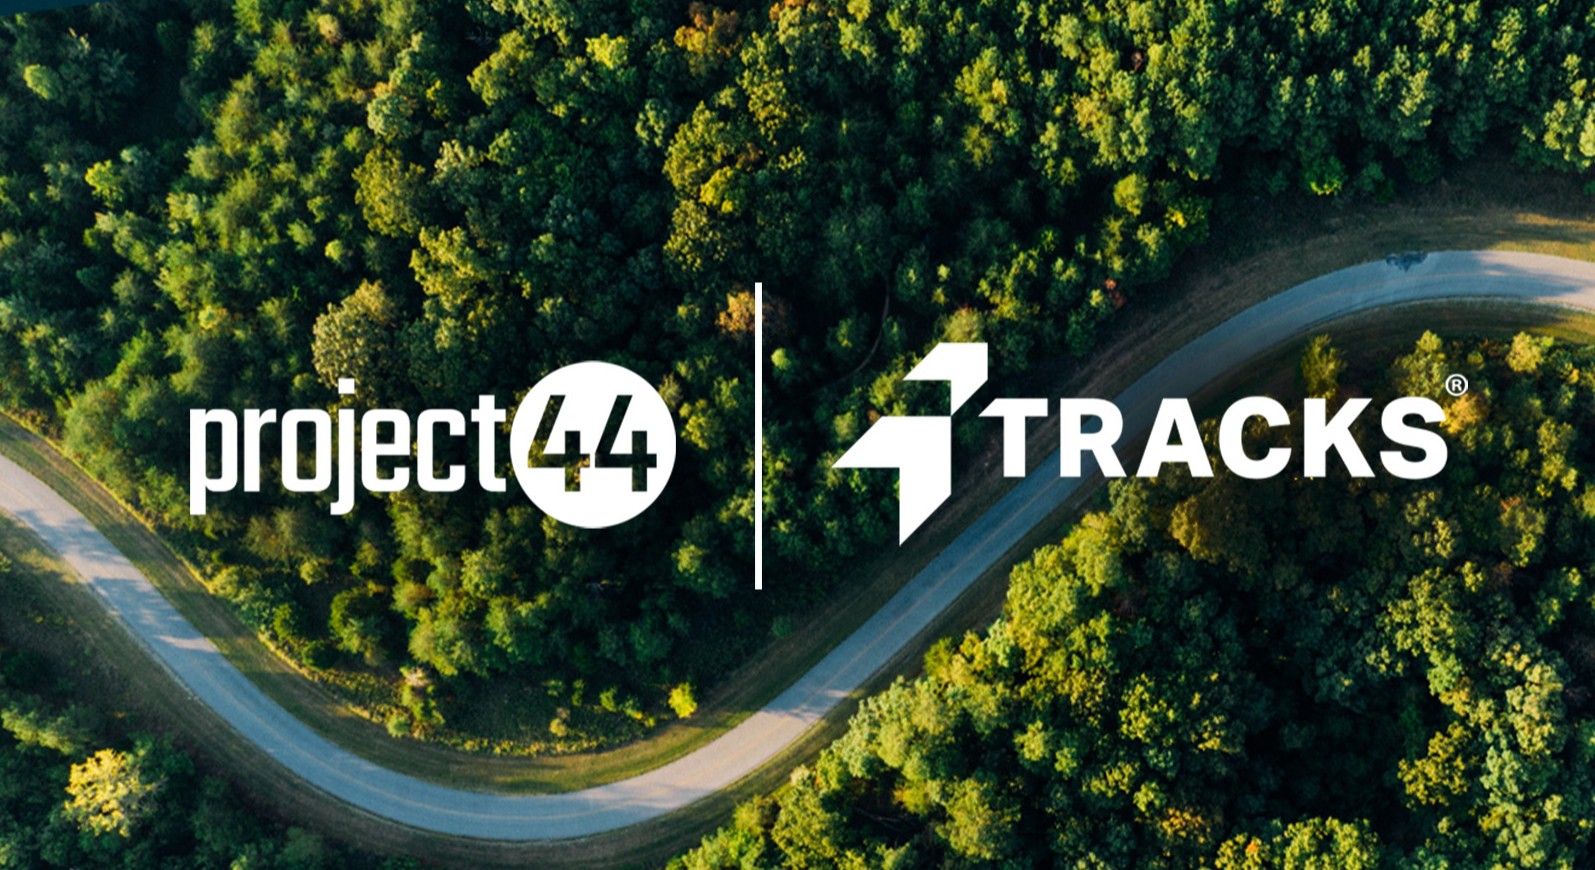 Tracks and project44 to create greener supply chains together 